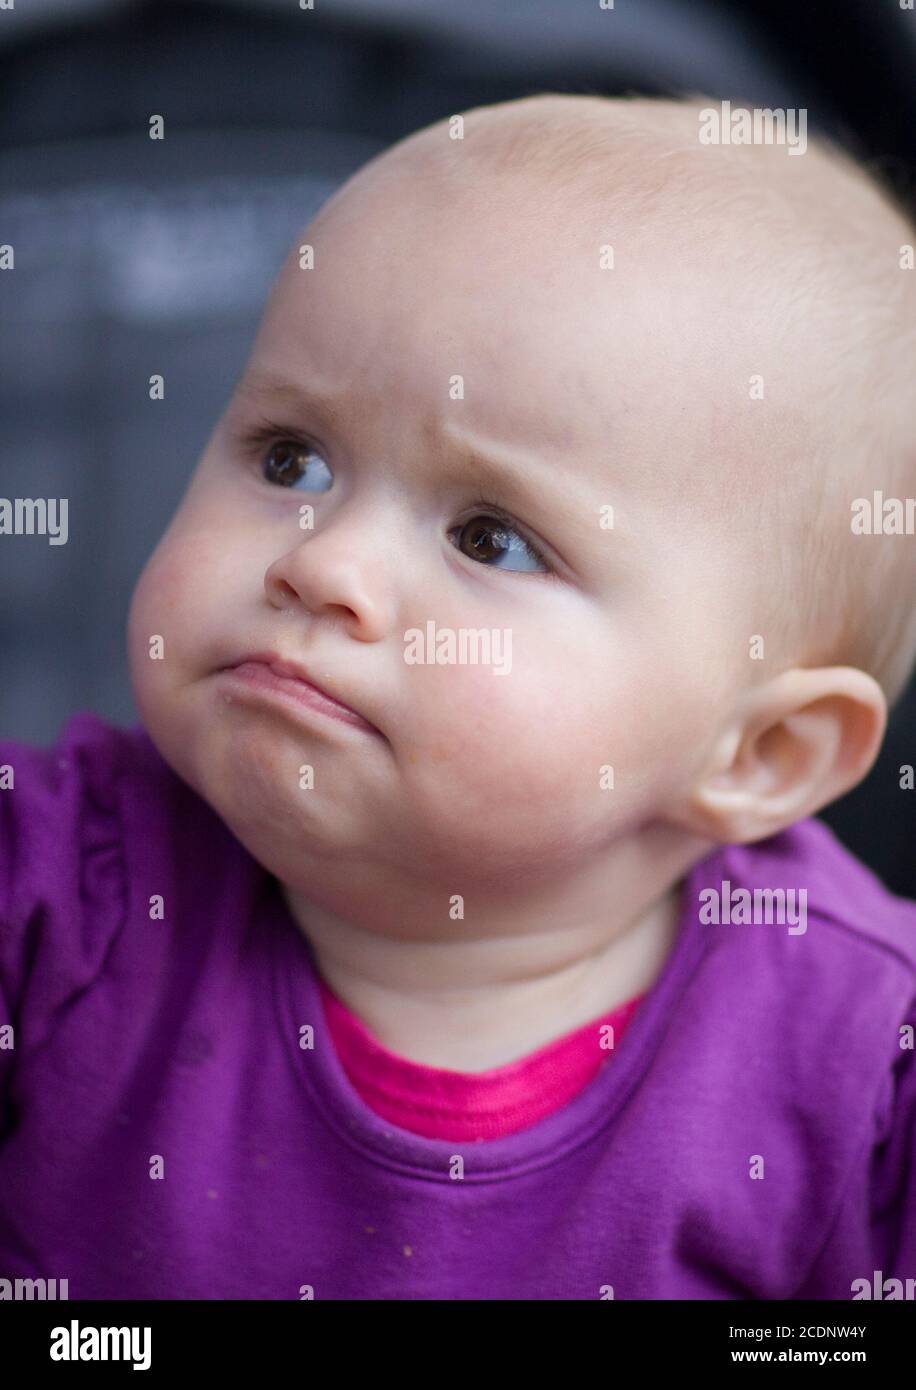 A frowning baby wearing a purple top in a pram Stock Photo